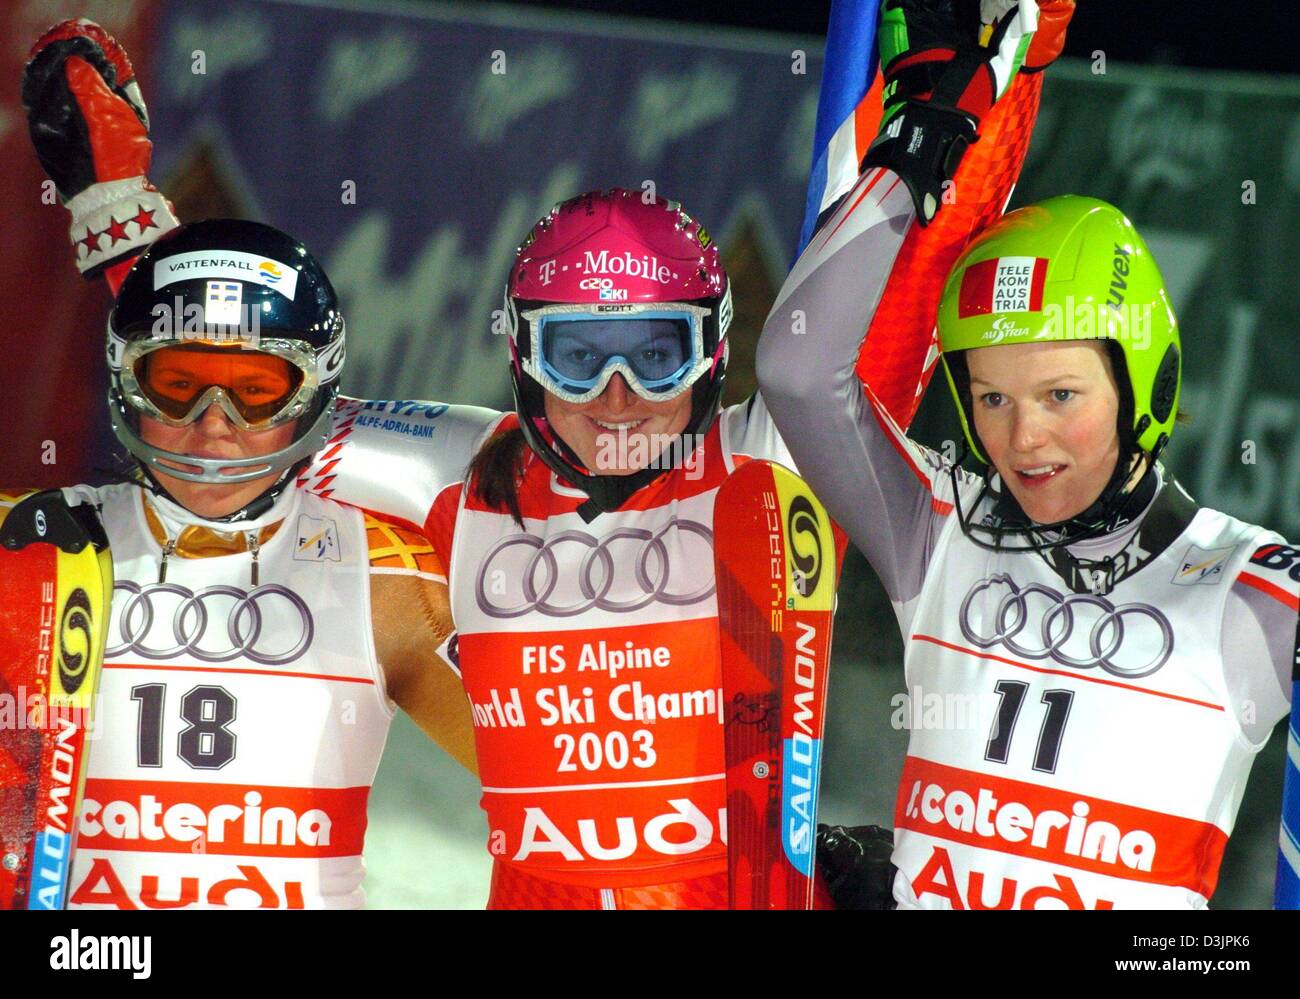 (dpa) - Croatian skier Janica Kostelic (C), Austrian skier Marlis Schild (R) and Swedish skier Anja Paerson cheer and smile after the Women's Slalom Combined at the Alpine Skiing World Championships in Santa Caterina, Italy, 04 February 2005. Kostelic won gold and the world champion title, Paerson won silver and Schild took bronze. Stock Photo